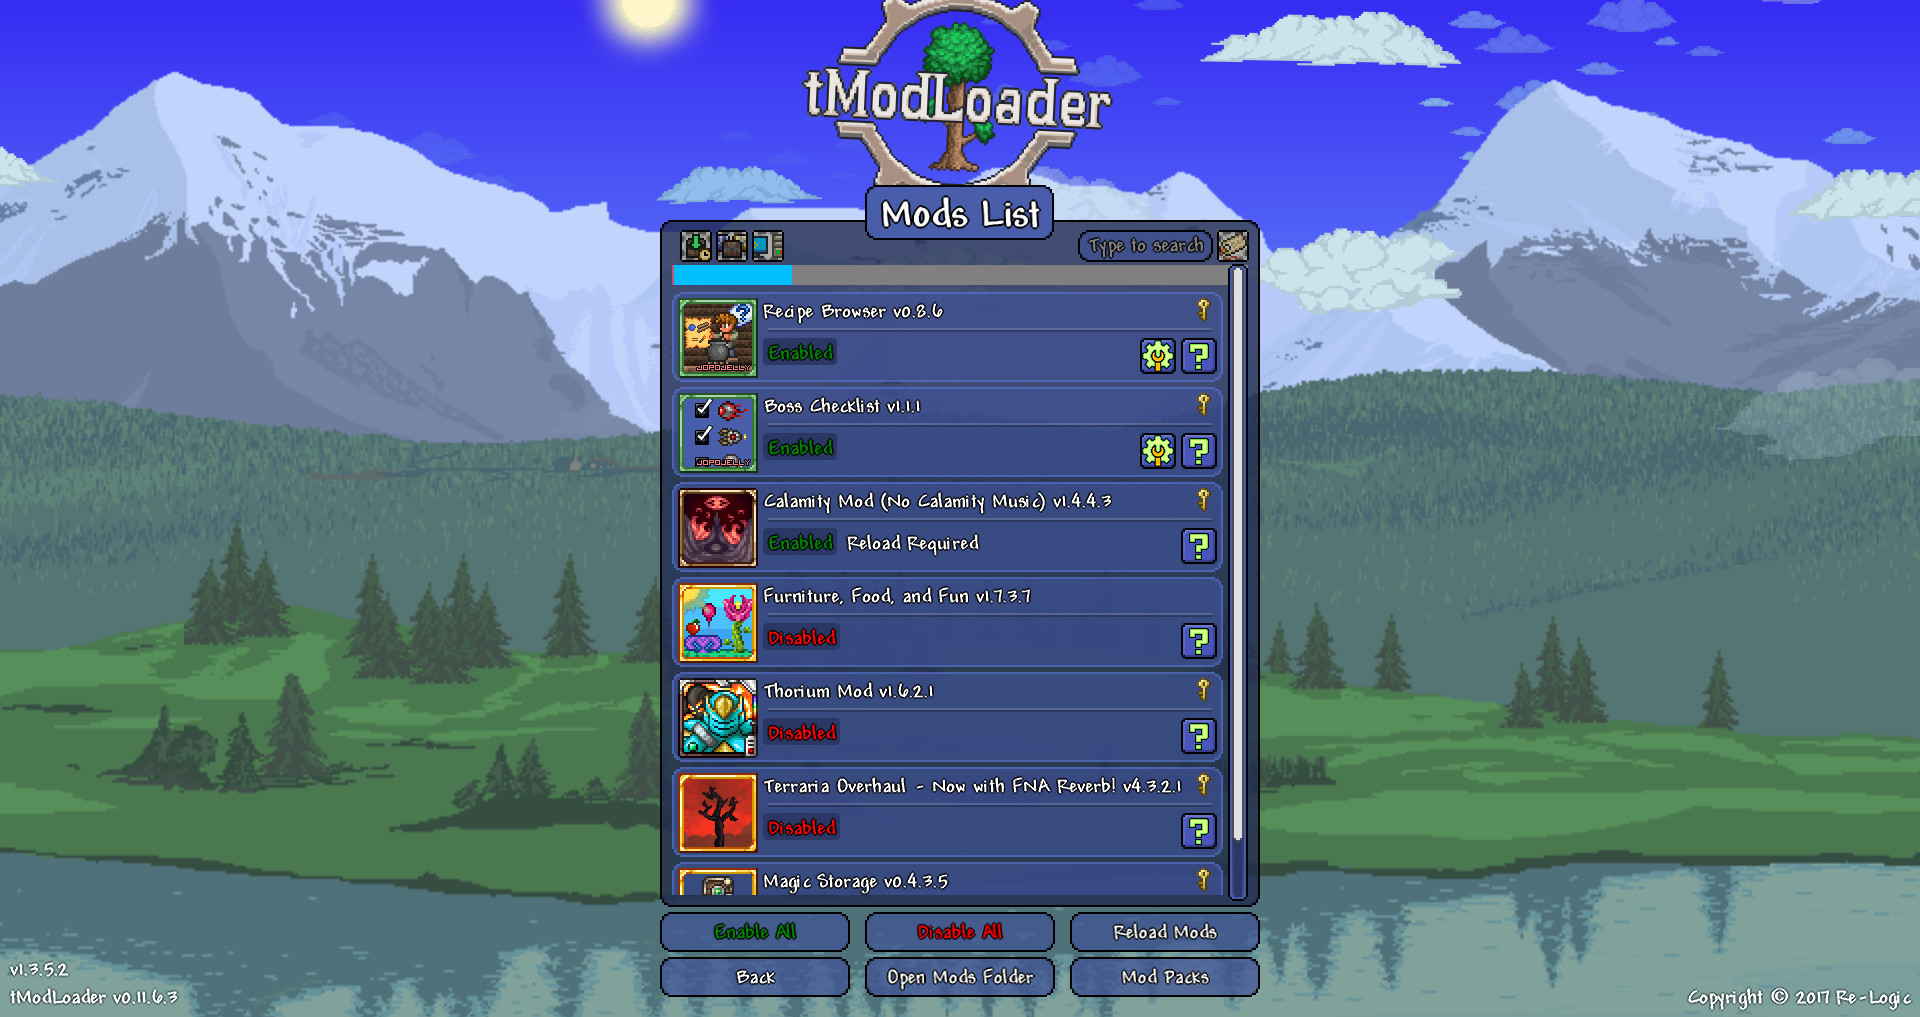 how to install tmodloader for terraria on mac